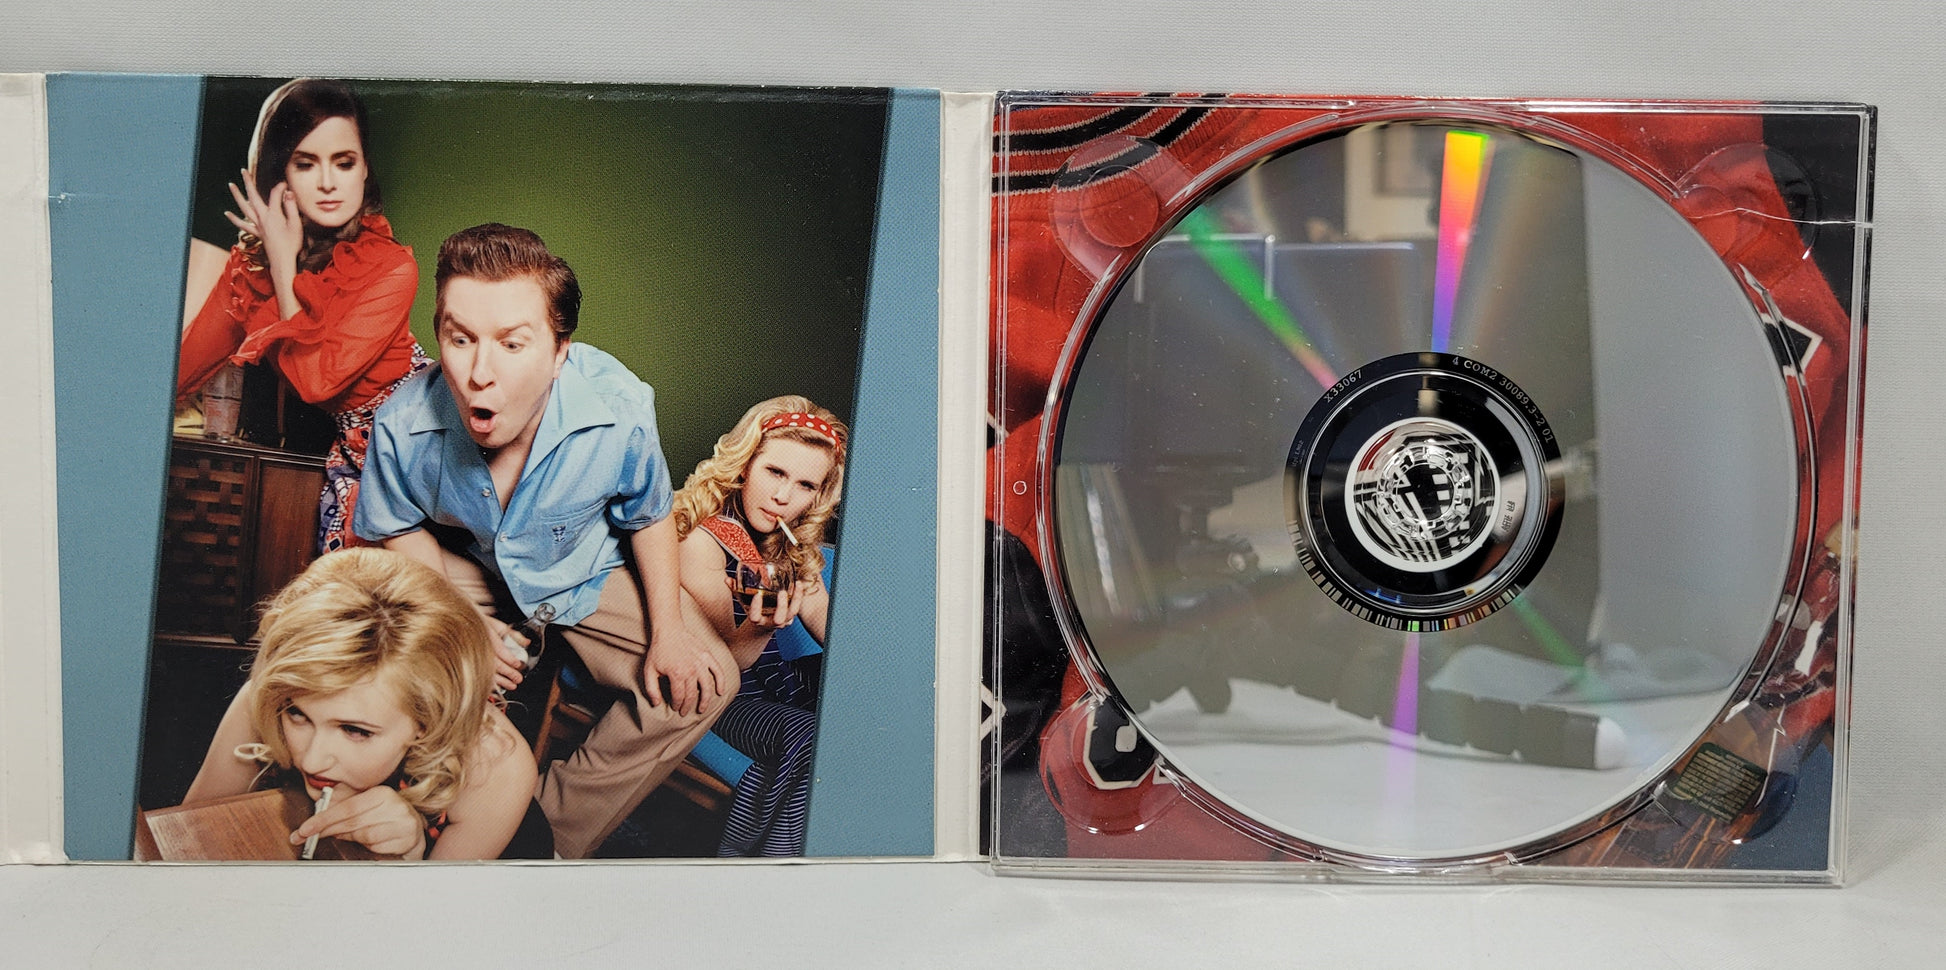 Nick Swardson - Seriously, Who Farted? [2009 Used CD]